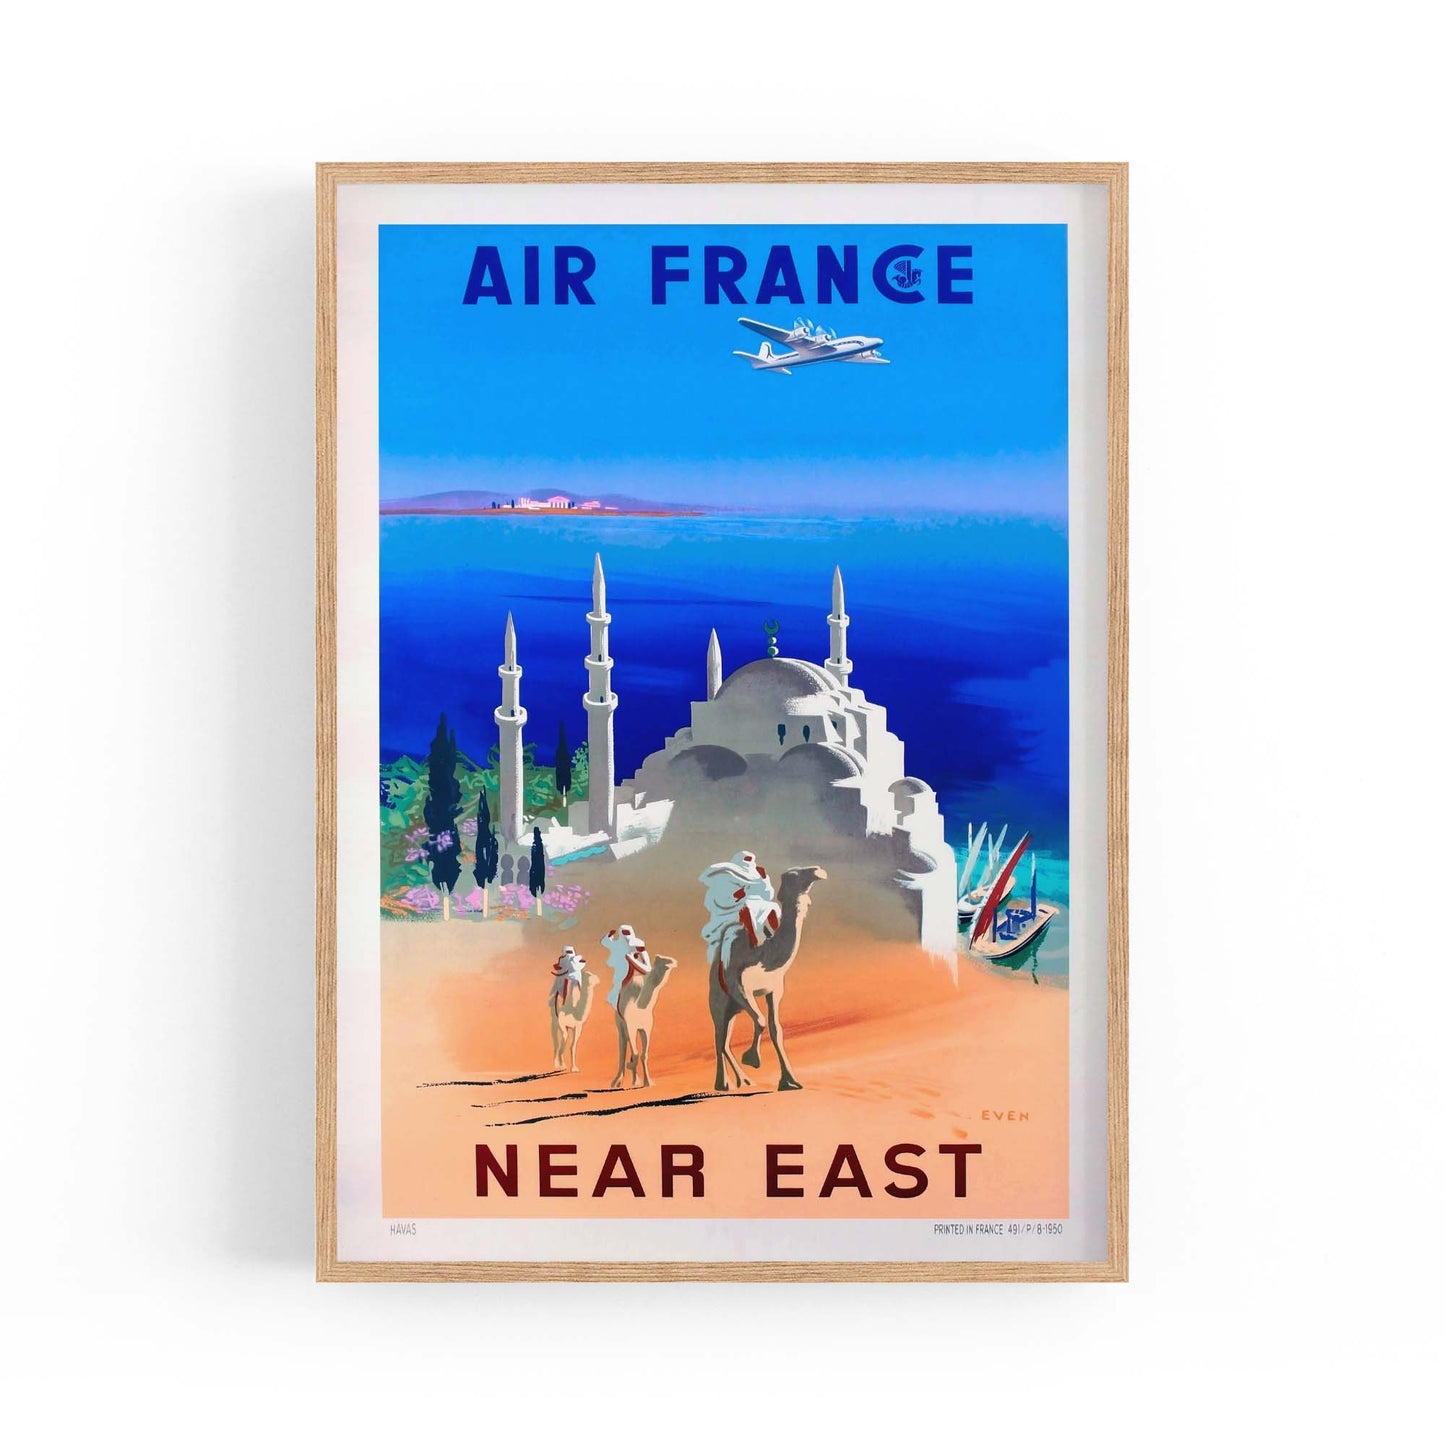 Air France to Egypt Vintage Travel Advert Wall Art - The Affordable Art Company